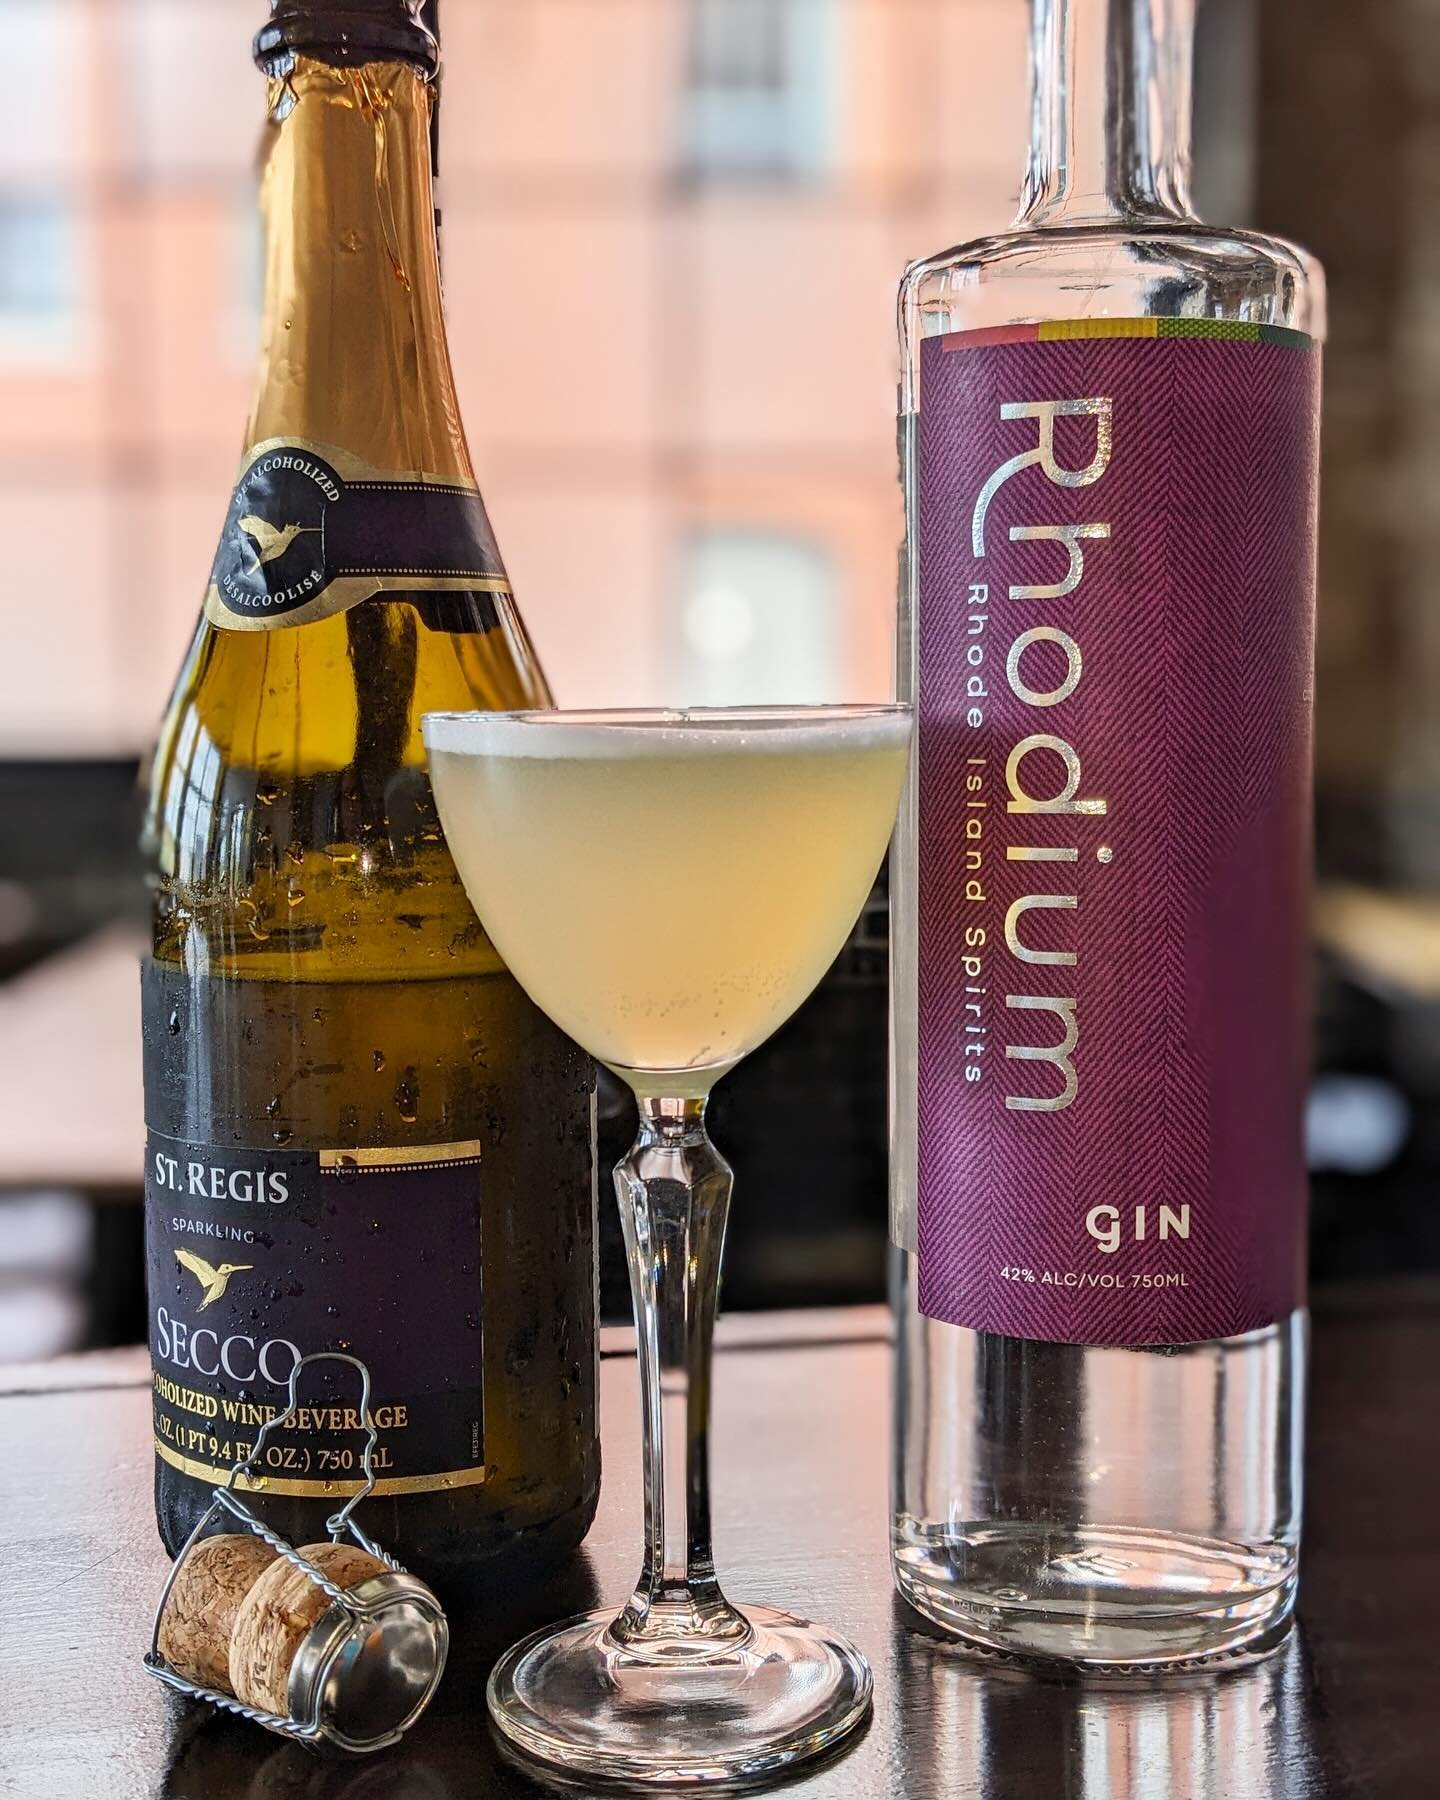 Here&rsquo;s your friendly reminder that Mother&rsquo;s Day is this Sunday. 💐 If you&rsquo;re looking for some laidback afternoon fun, we&rsquo;ll be serving up French 75s and MOM-osas from 1-6pm at the tasting room. 

And if you need a last minute 